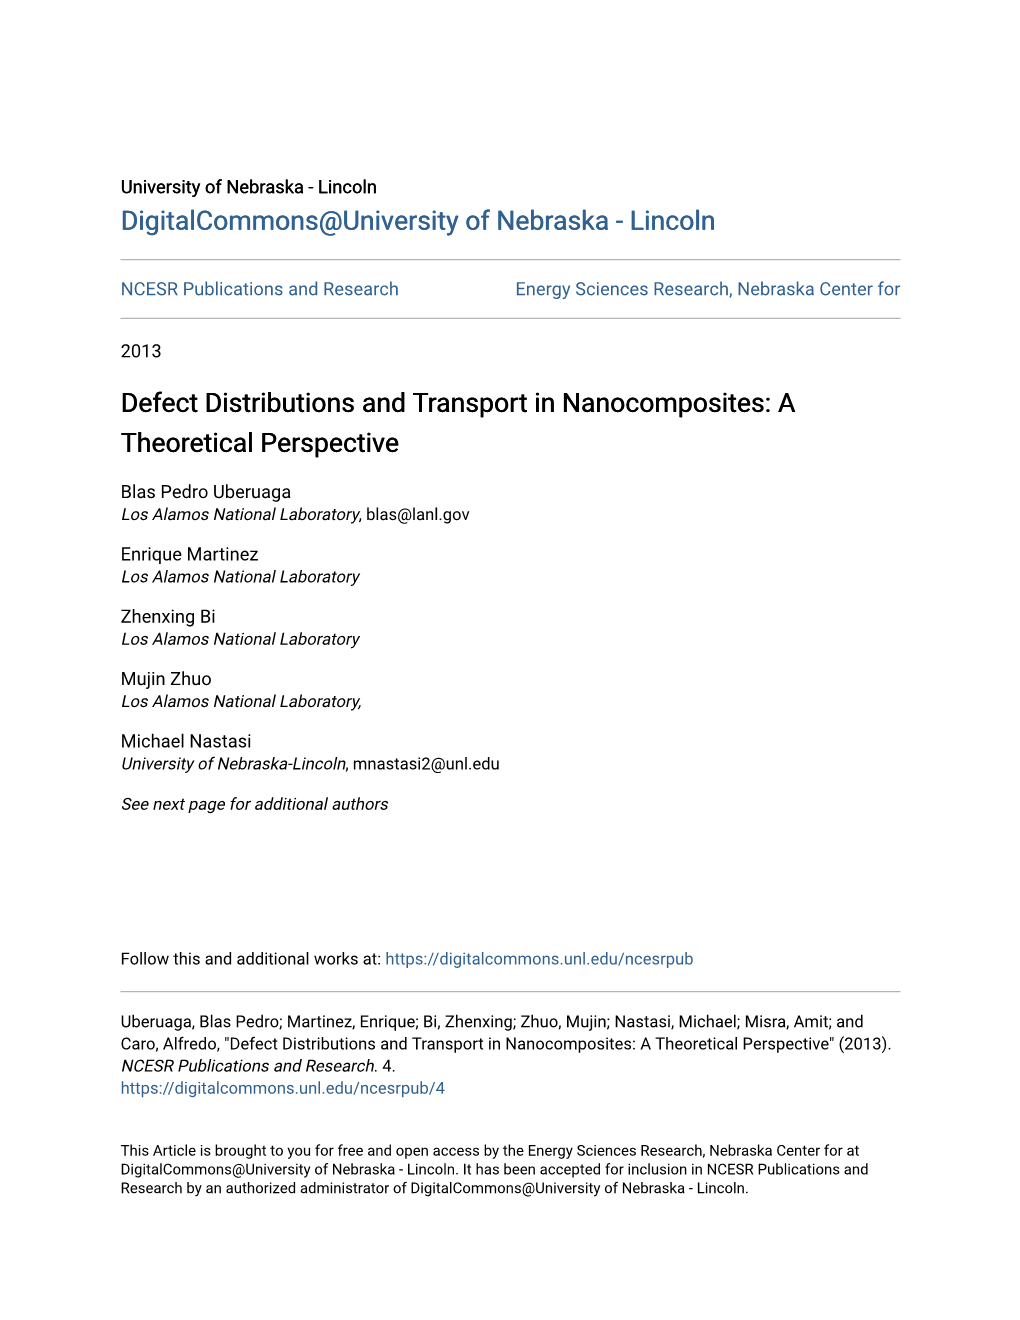 Defect Distributions and Transport in Nanocomposites: a Theoretical Perspective